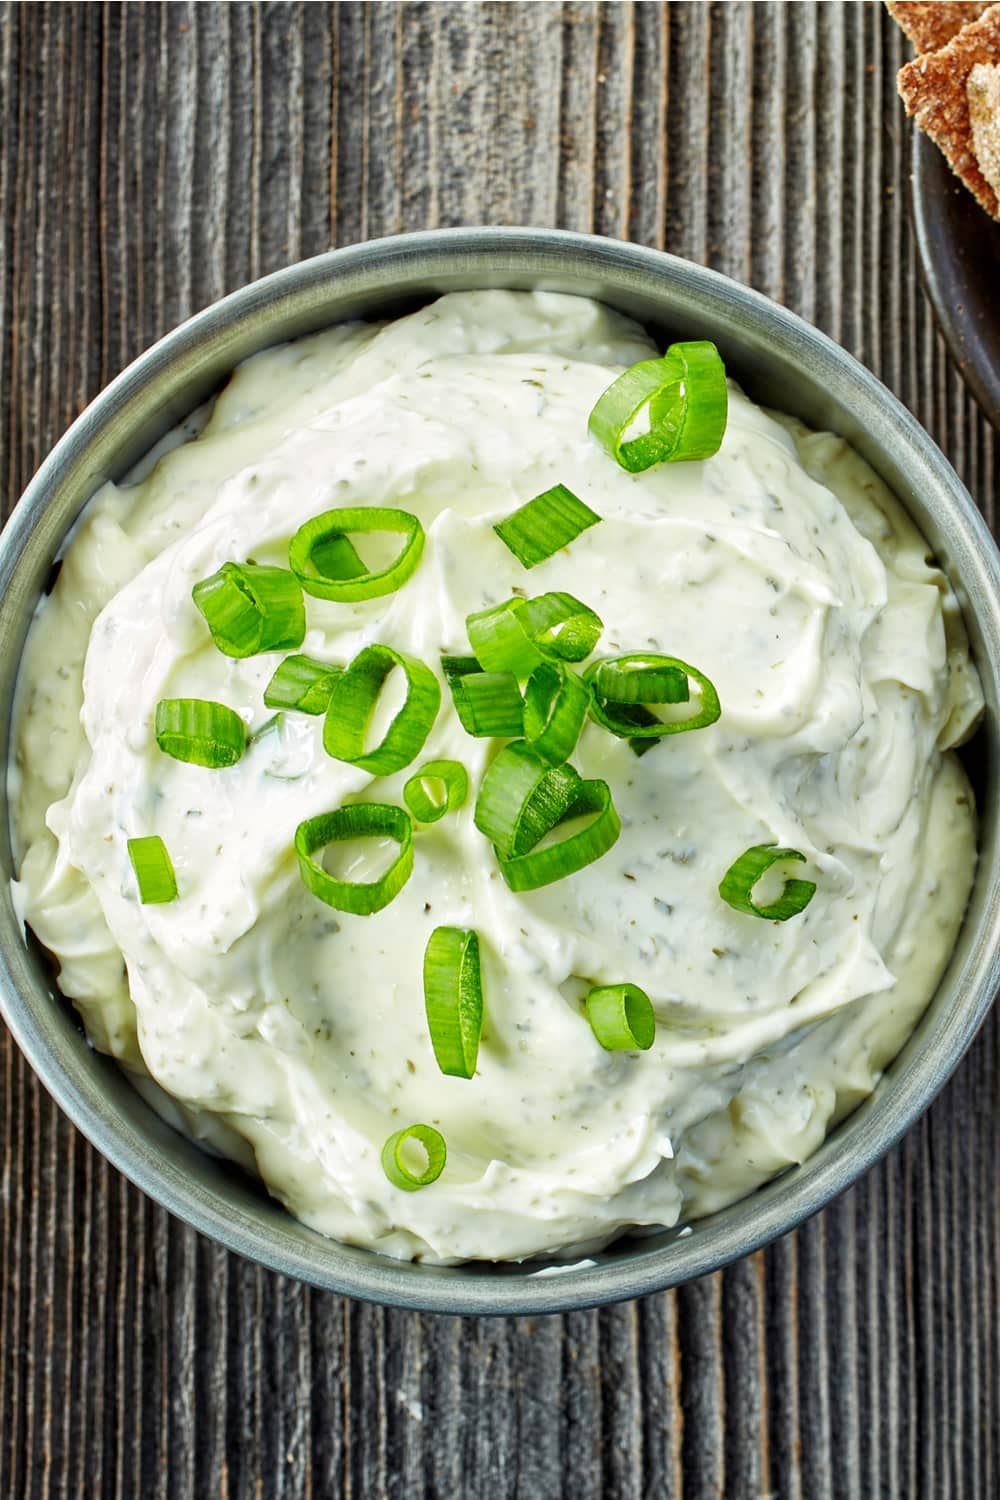 Bowl of Clam Dip garnished with green onions made with cream cheese, garlic, Worcester sauce, and lemon juice.